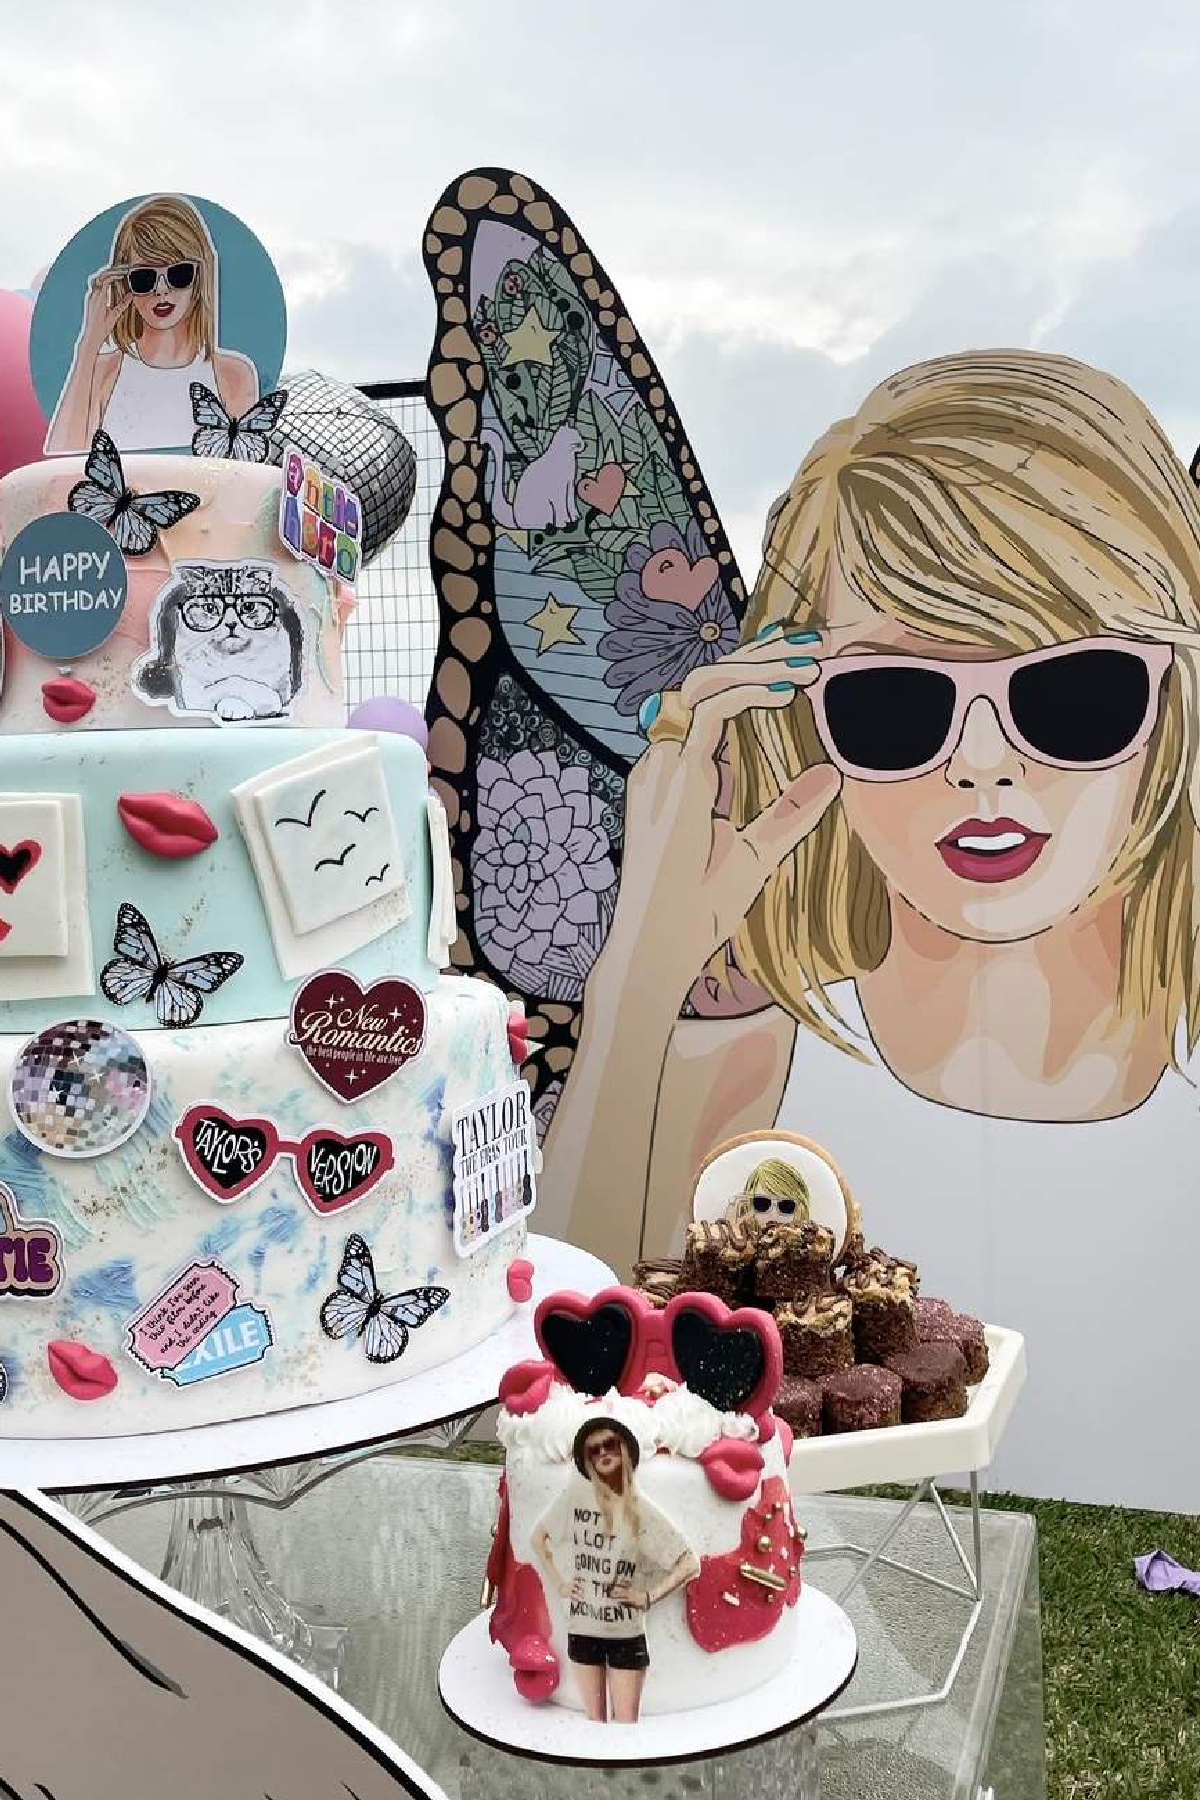 Taylor Swift birthday party 